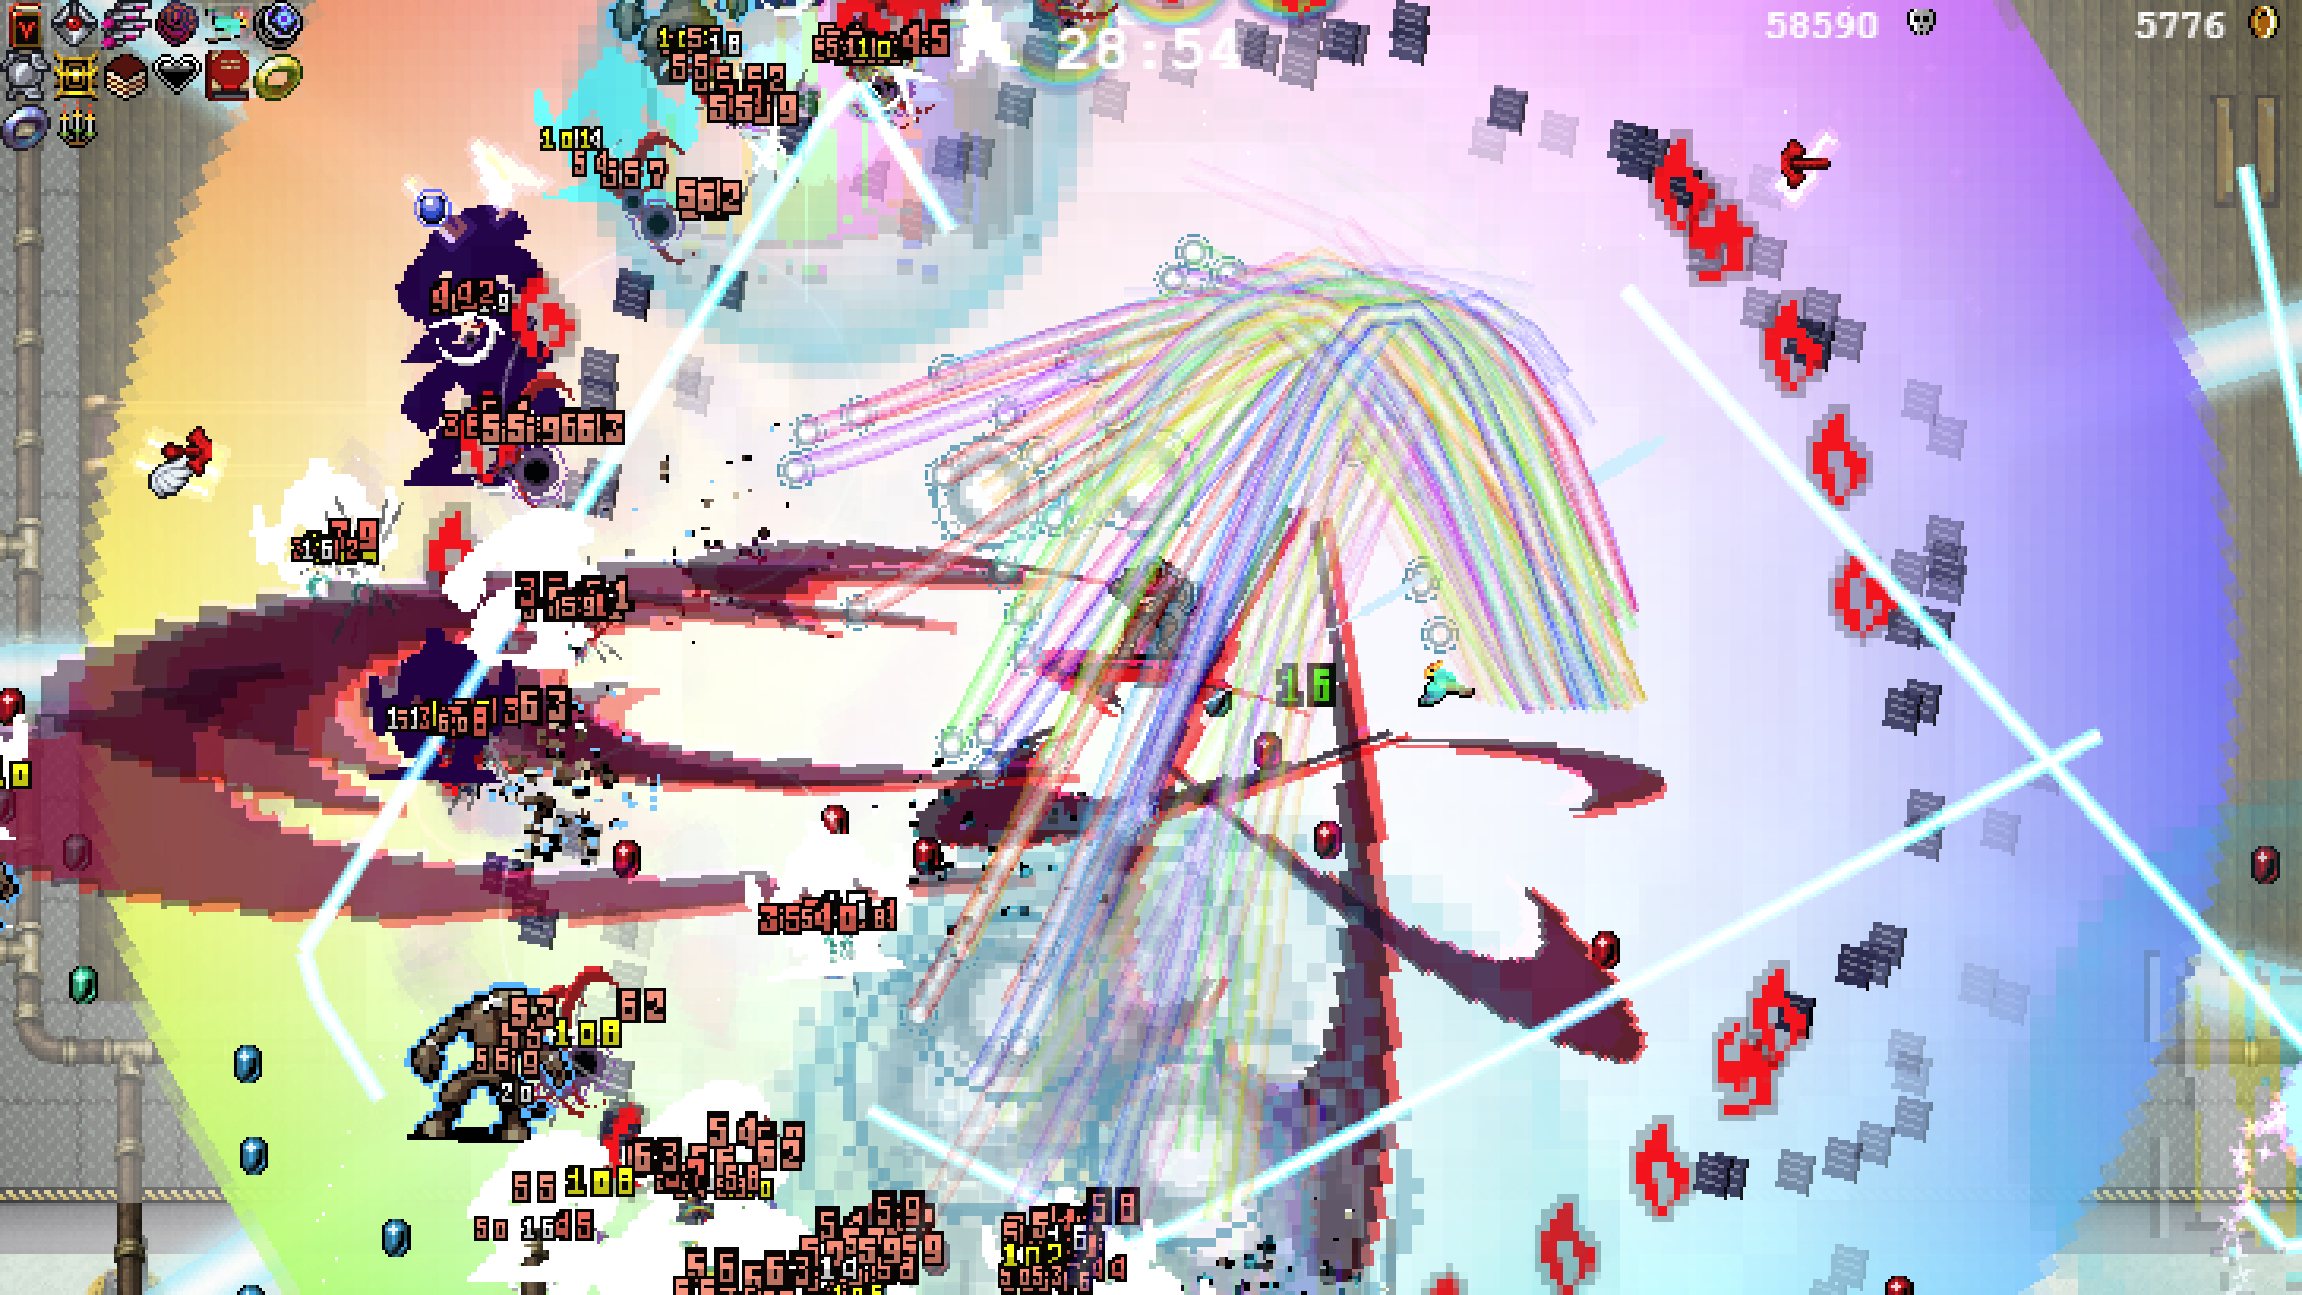 A colourful mess of screen-obscuring explosions in a Vampire Survivors screenshot.